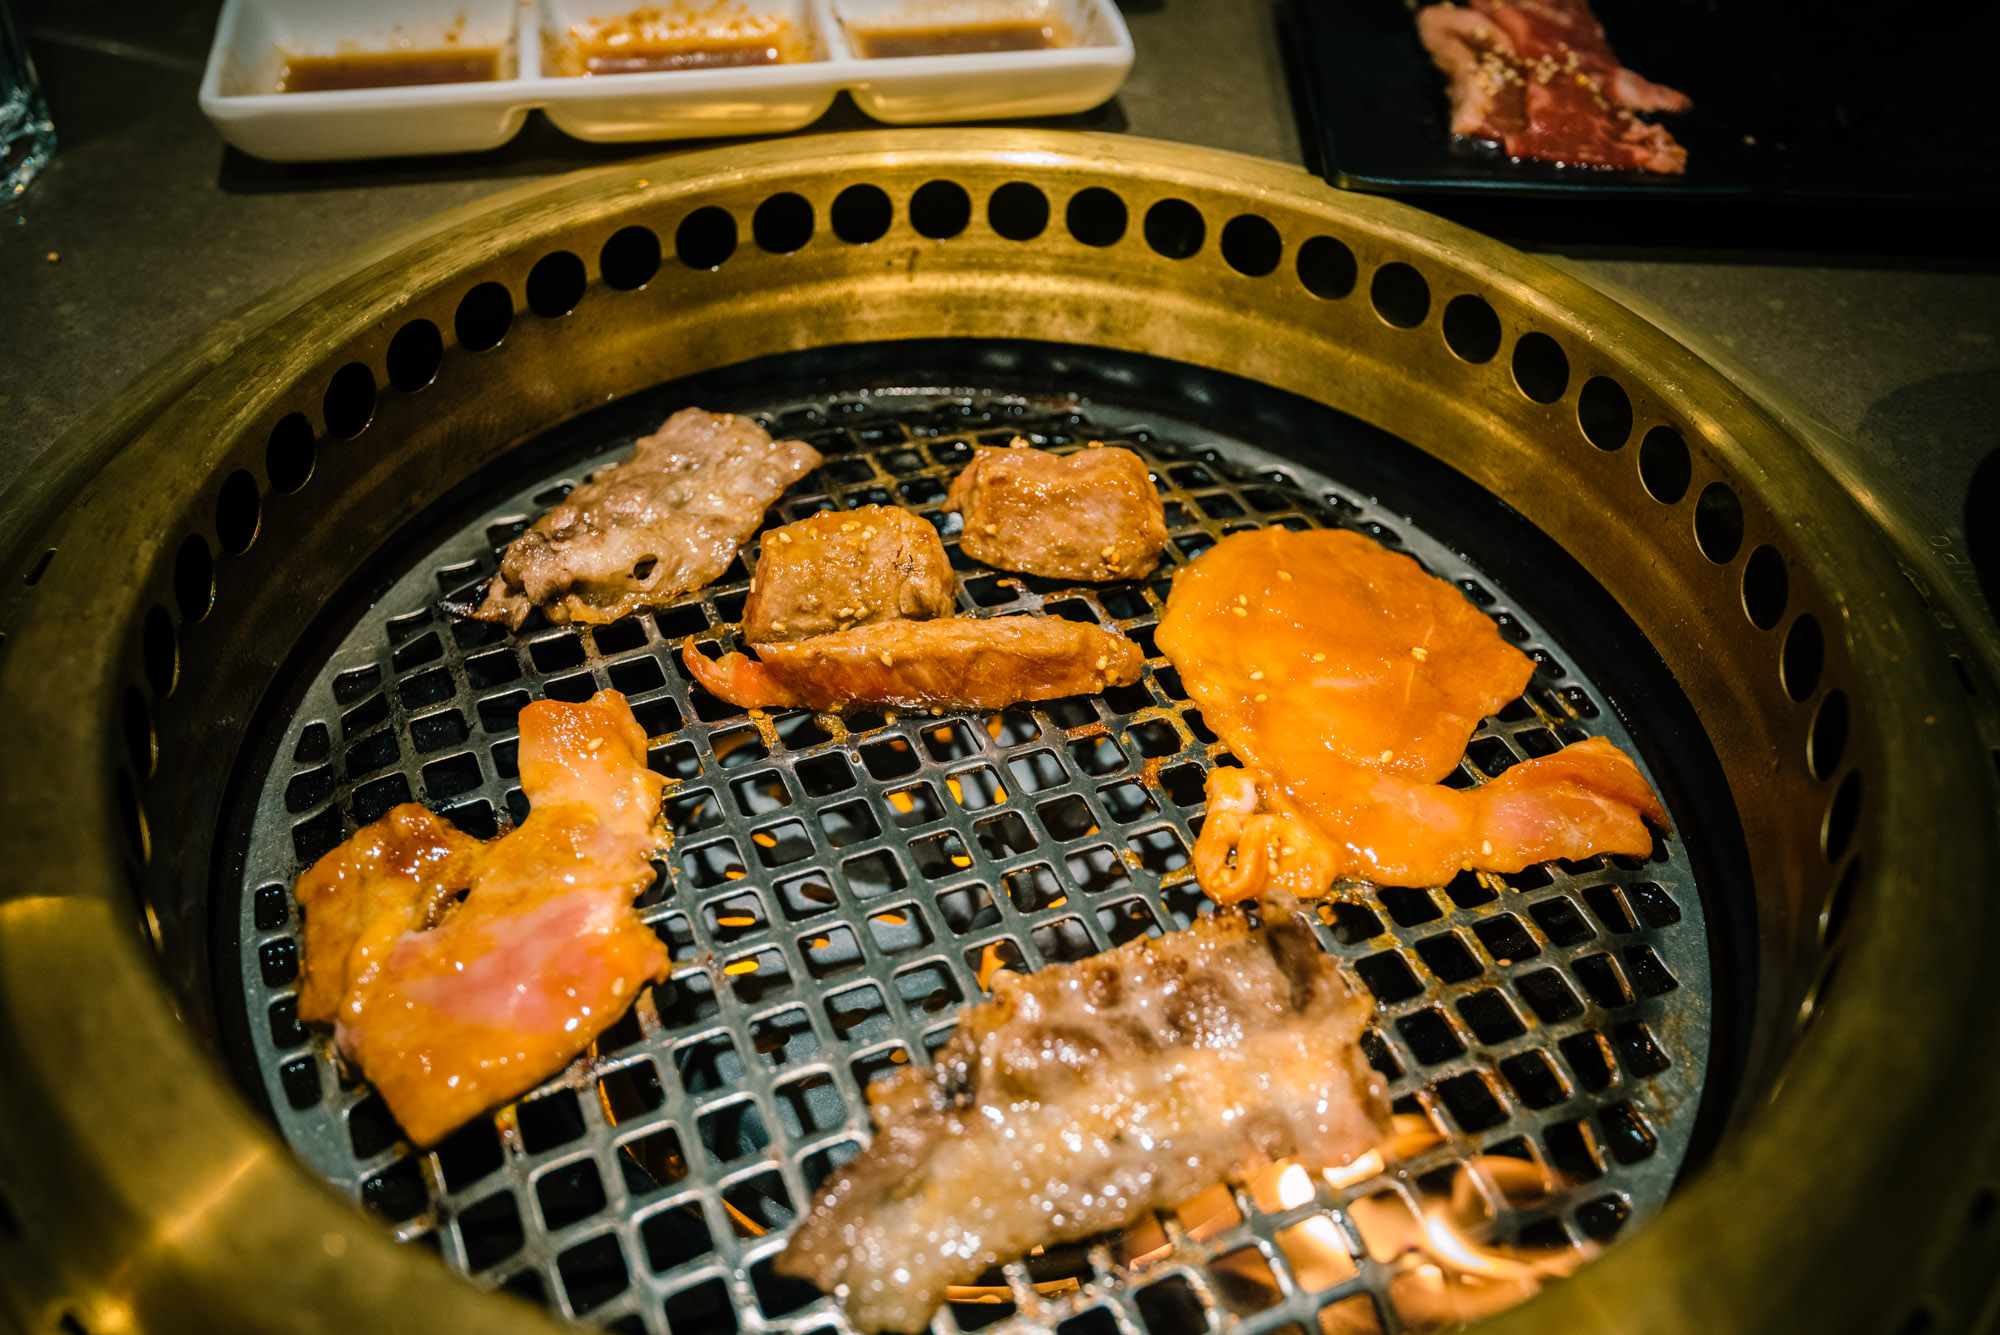 Jeff On The Road - Food - Montreal - Gyu-Kaku Japanese BBQ - All photos are under Copyright © 2017 Jeff Frenette Photography / dezjeff. To use the photos, please contact me at dezjeff@me.com.